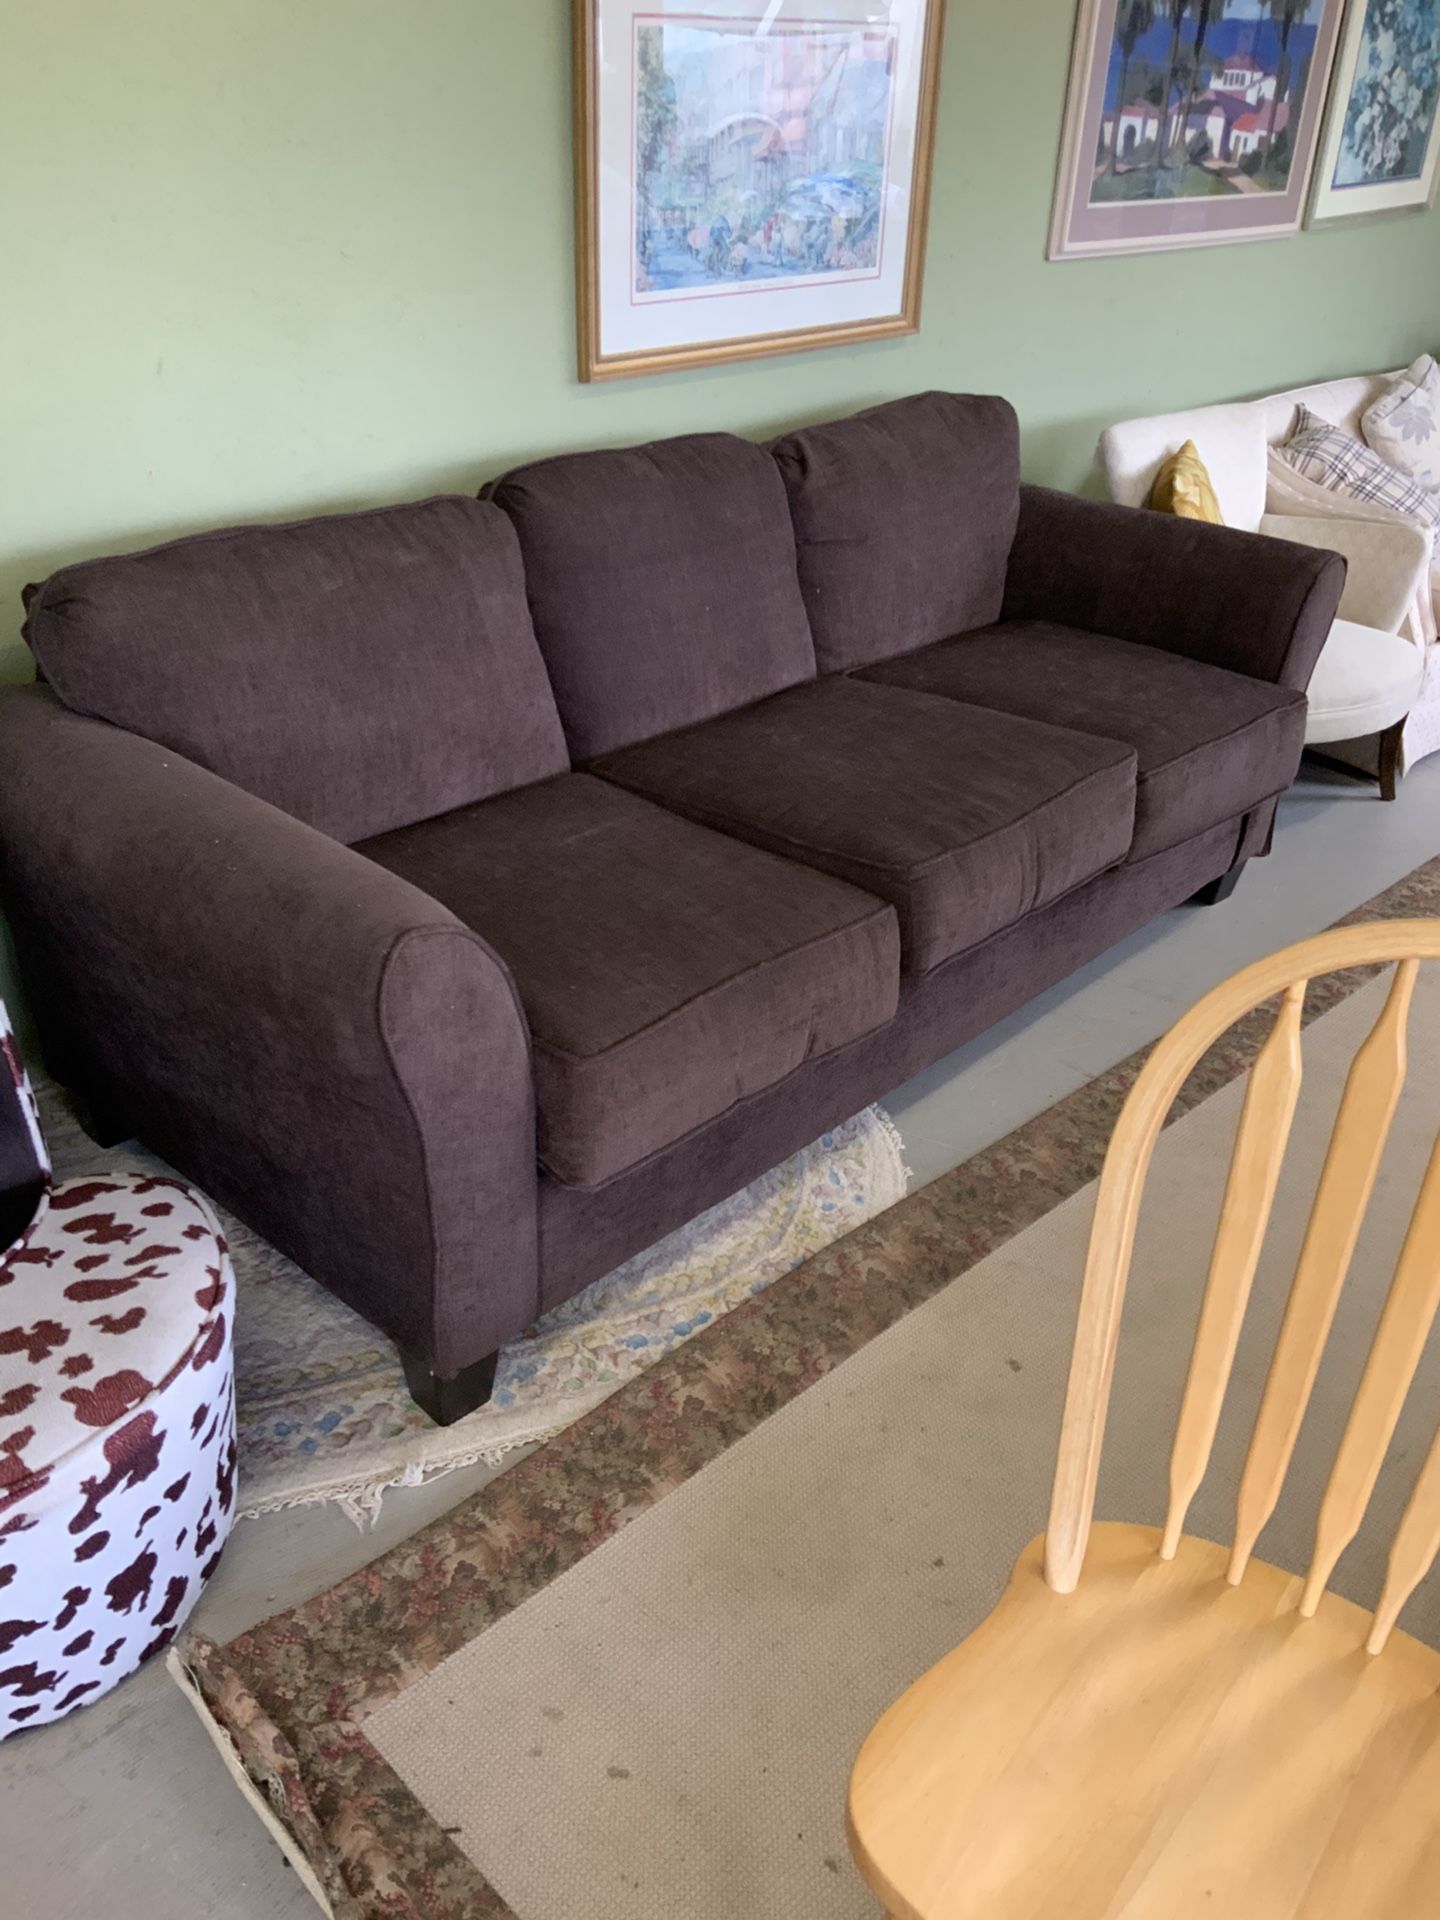 Chocolate Colored Couch (30% Off Price Listed)